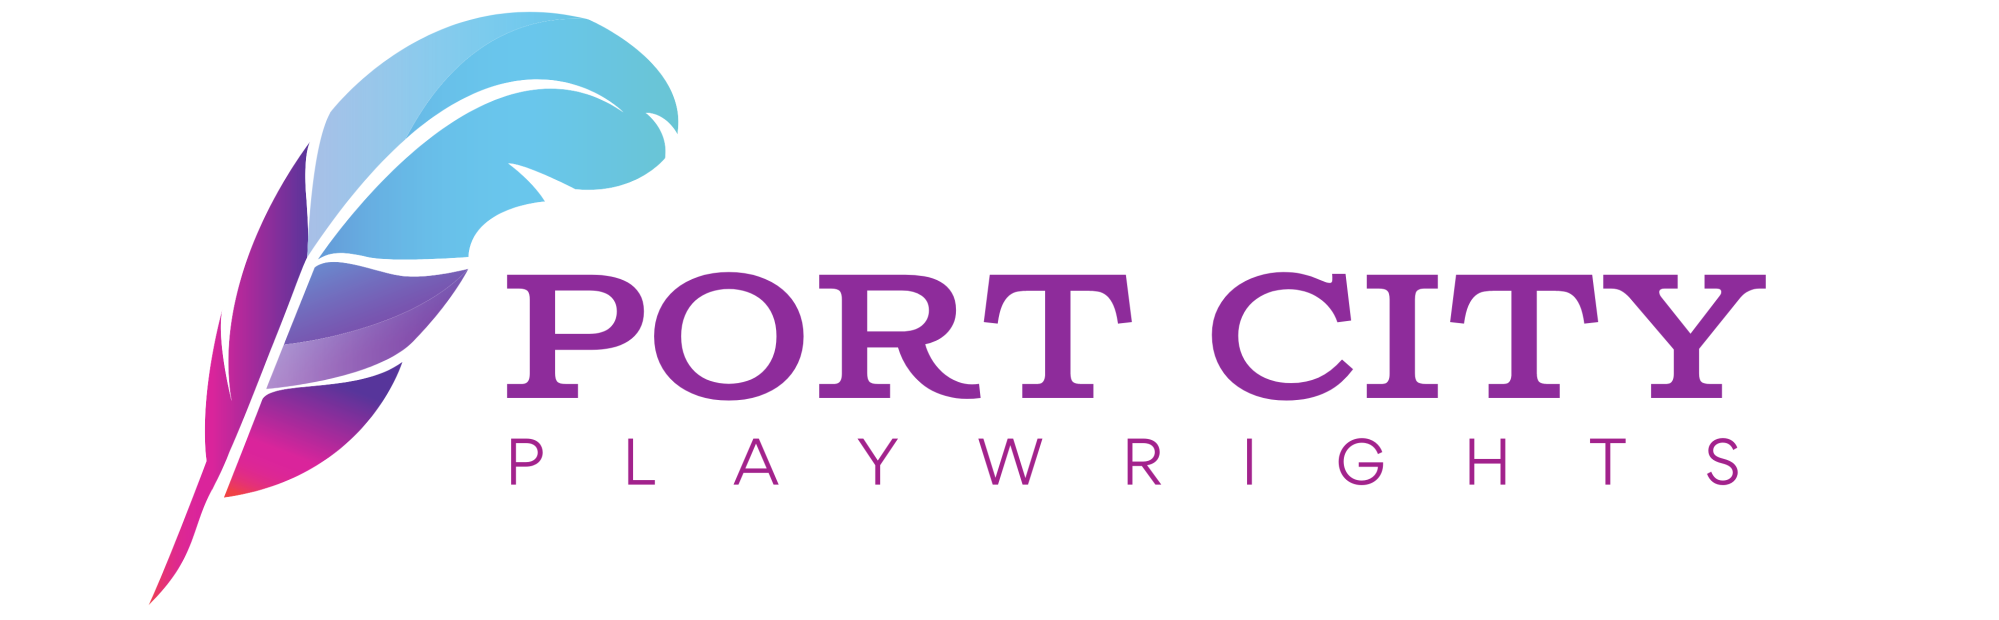 A community of scriptwriters in the greater Wilmington, North Carolina region